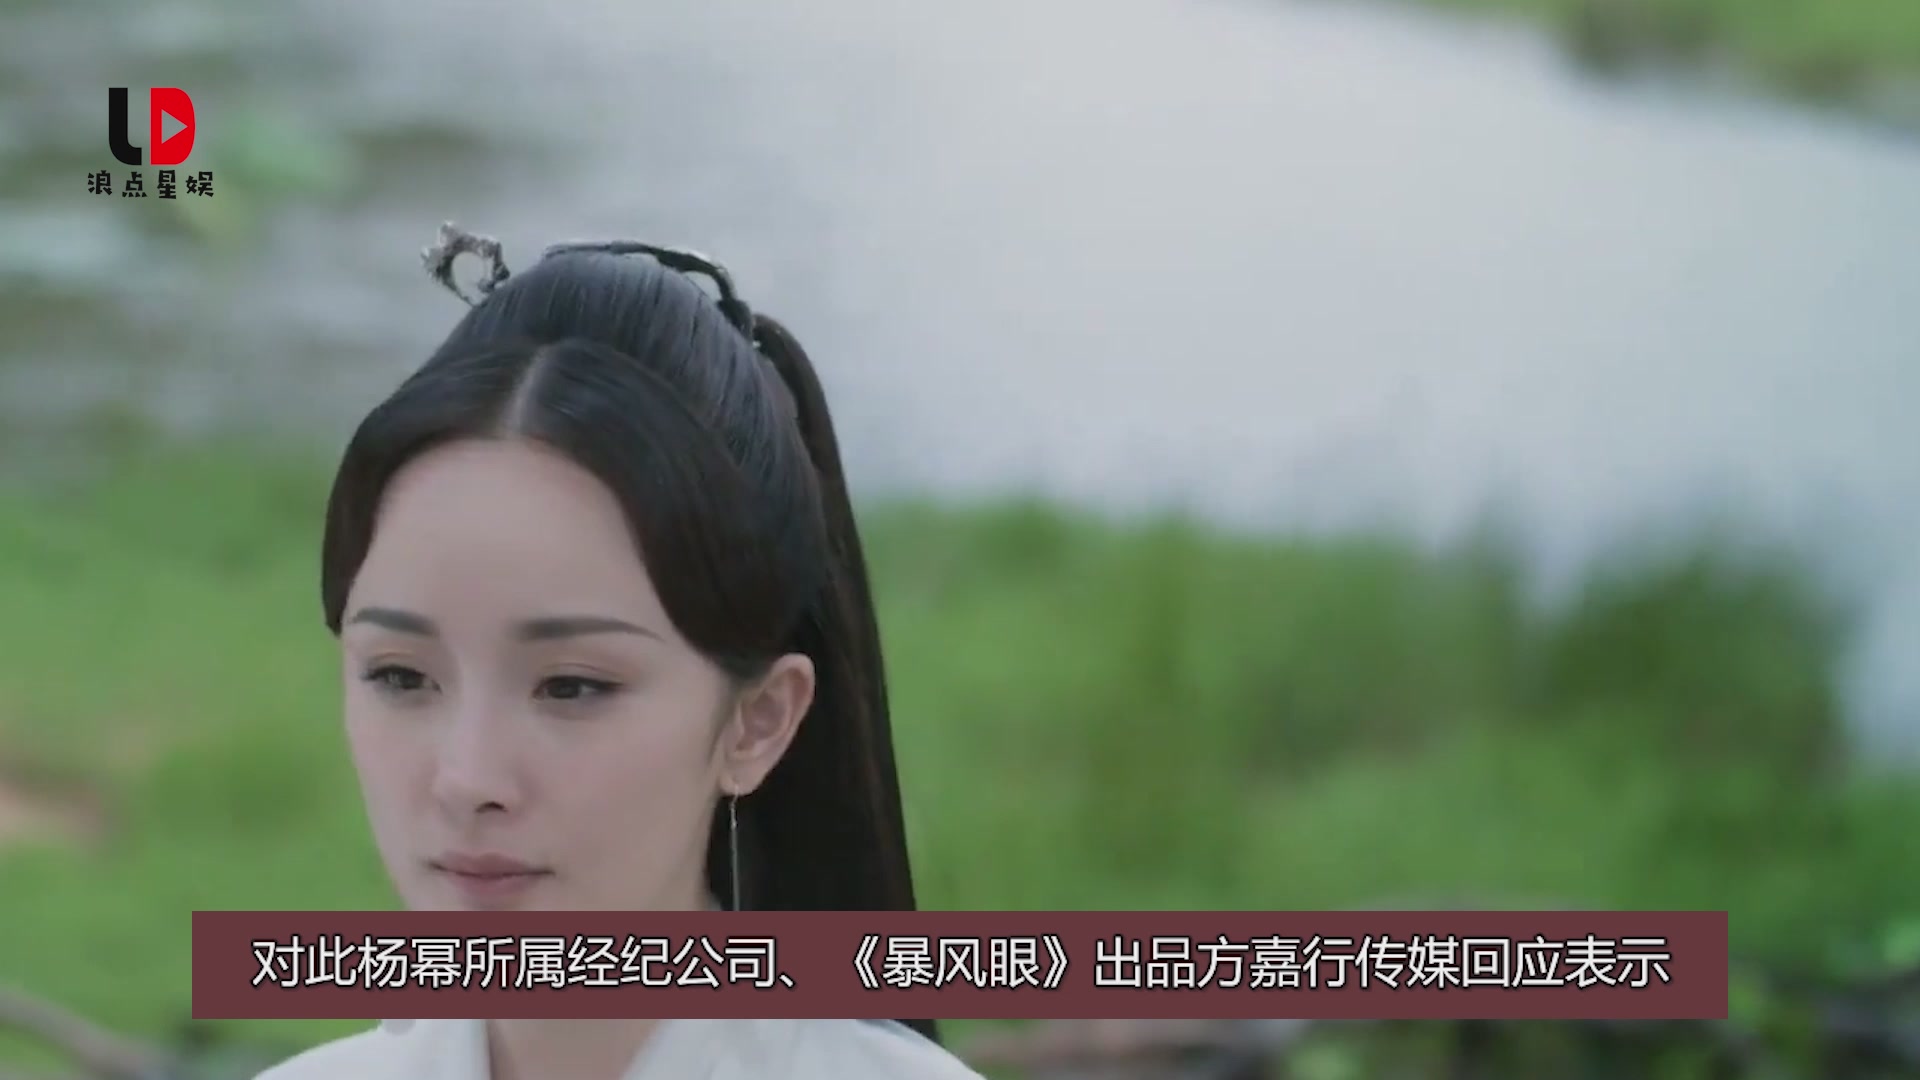 Yang Mi fang denied taking frequent leave to go out for money and refused to smear rumors.